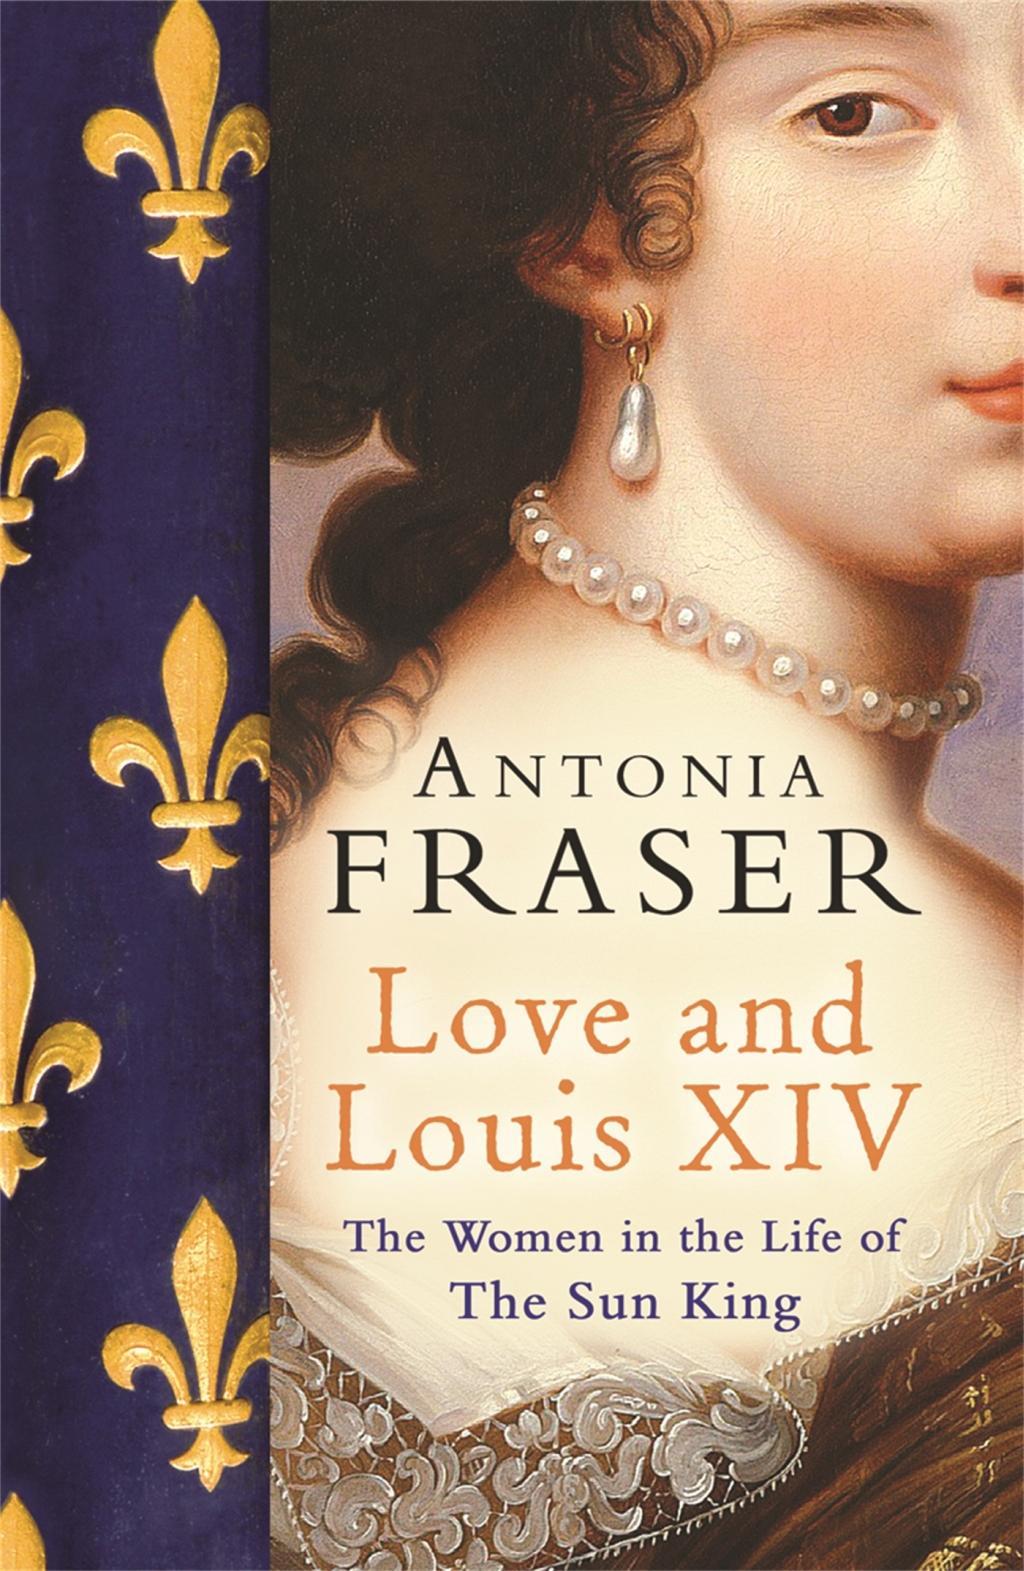 Love and Louis XIV / The Women in the Life of the Sun King / Lady Antonia Fraser / Taschenbuch / 470 S. / Englisch / 2007 / Orion Publishing Co / EAN 9780753822937 - Fraser, Lady Antonia